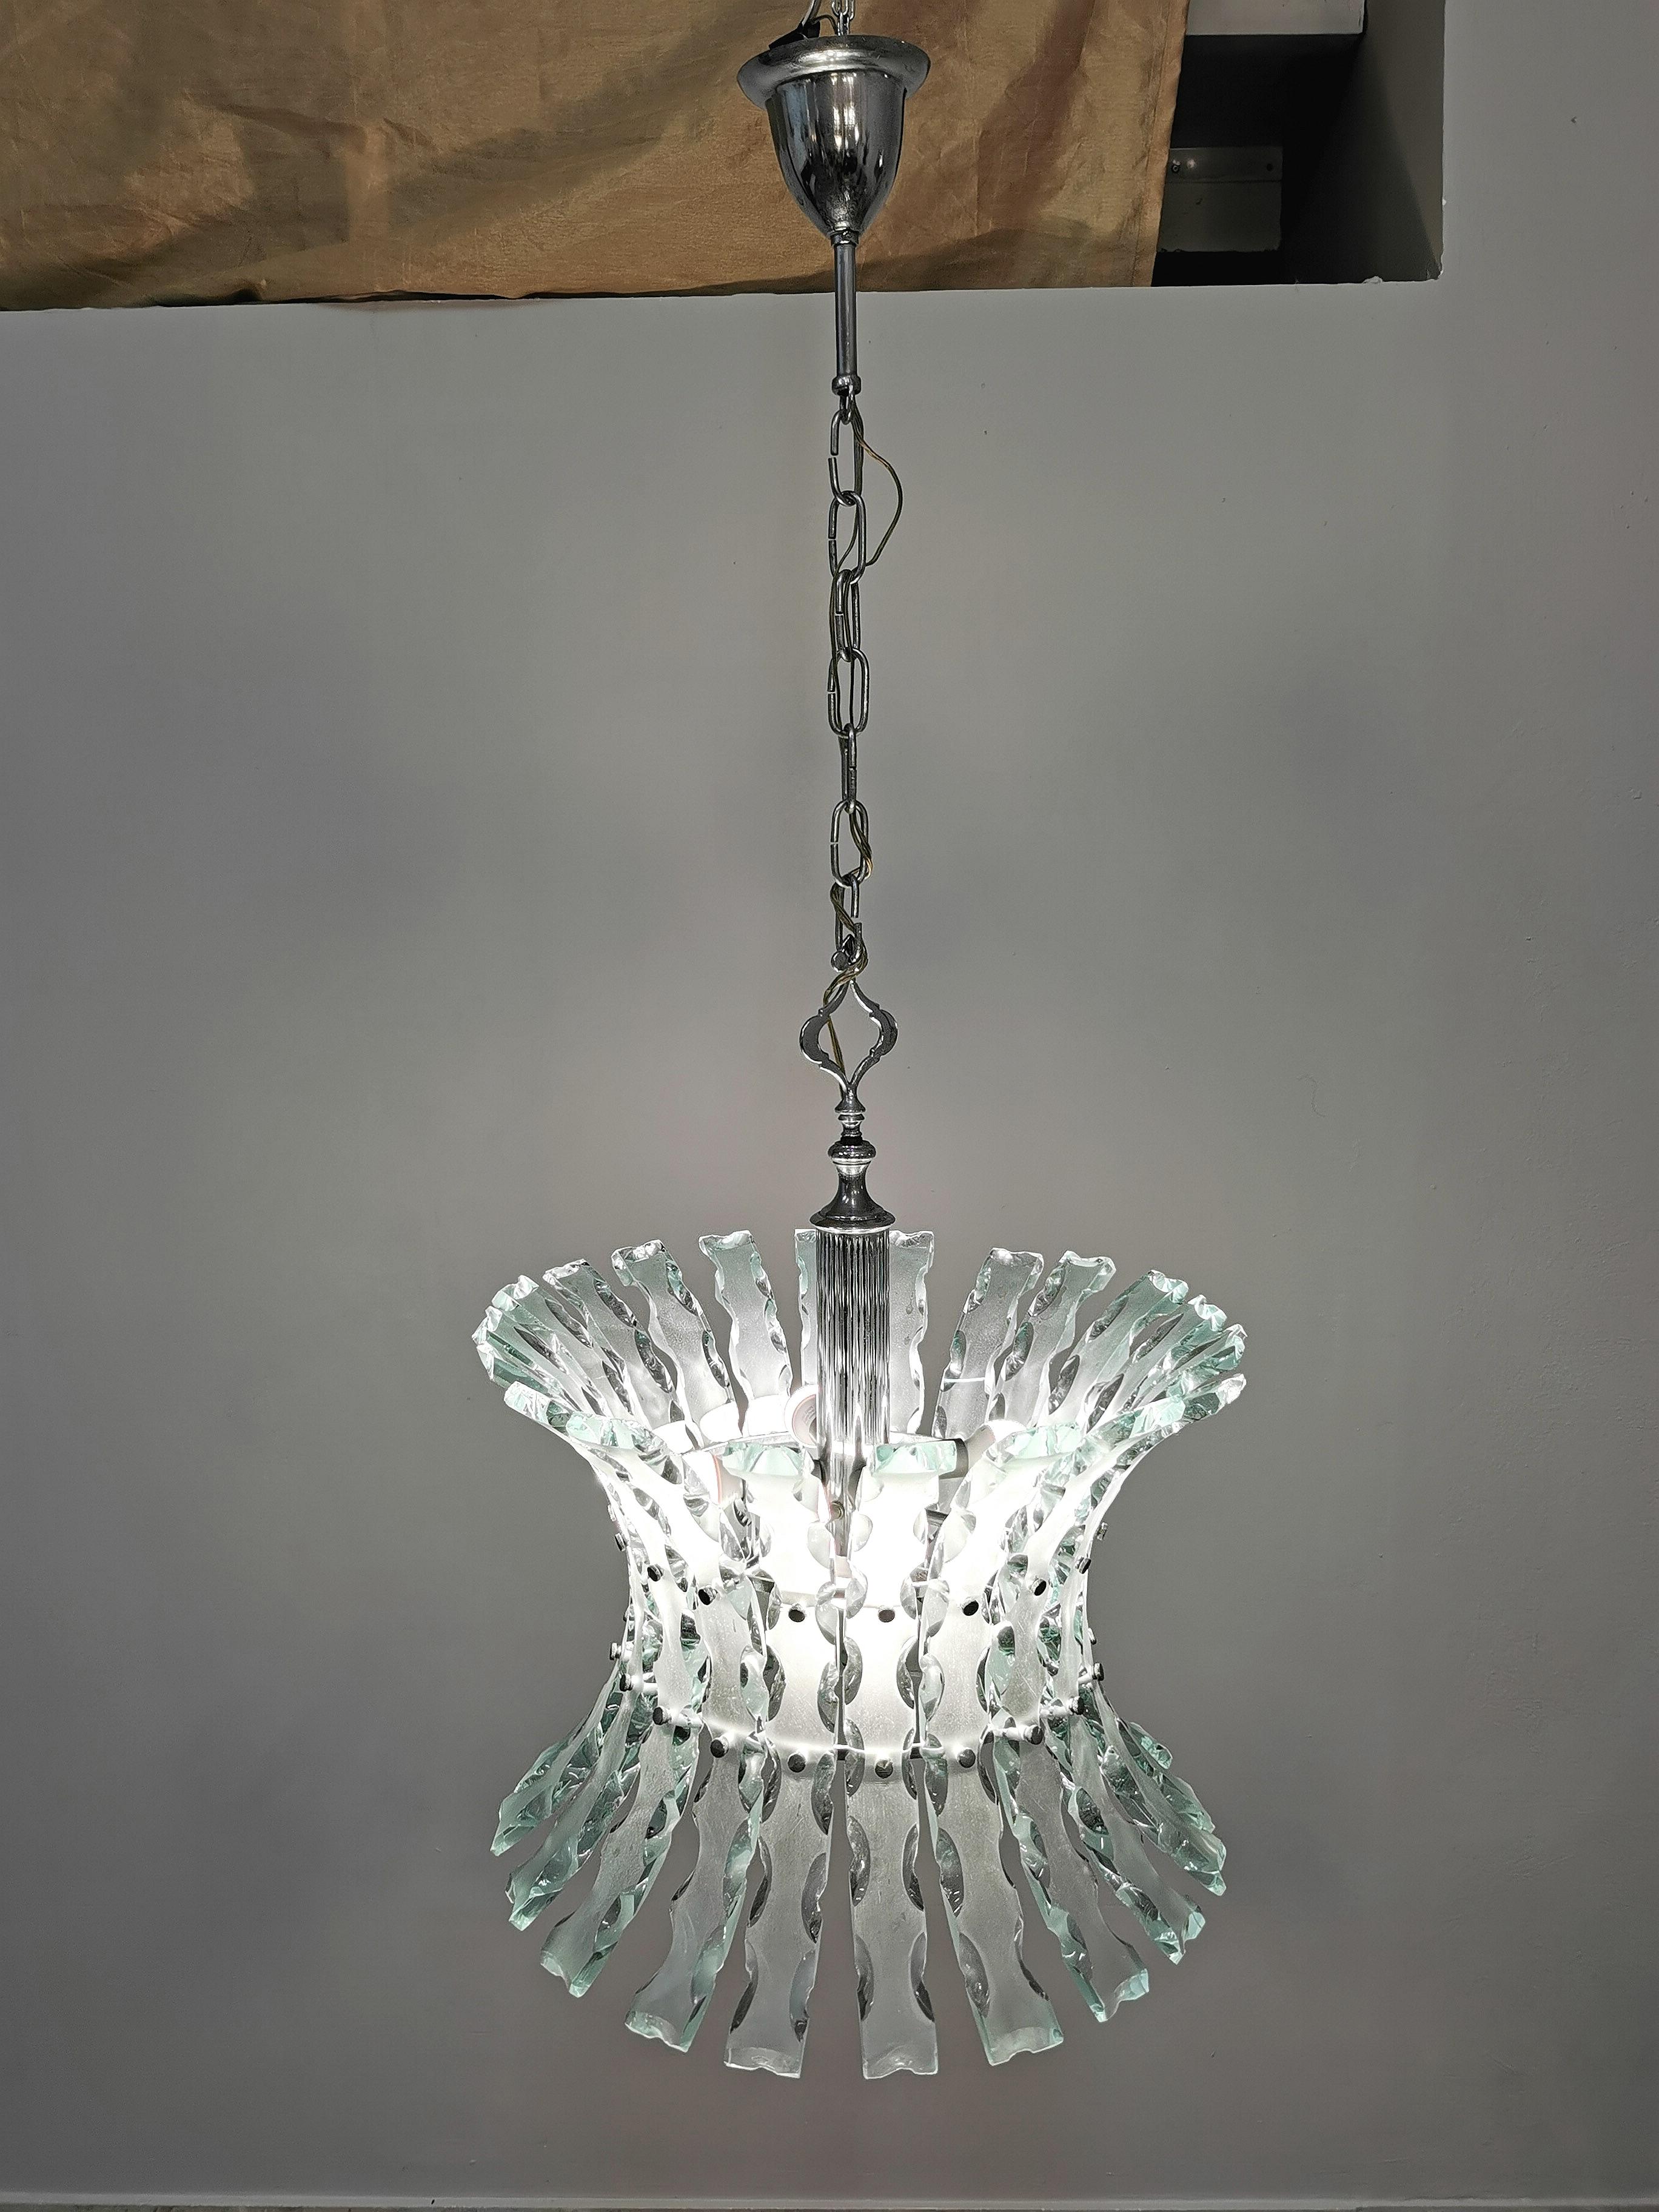 Elegant and particular chandelier produced by the renowned Italian company Fontana Arte and by the Milanese company 